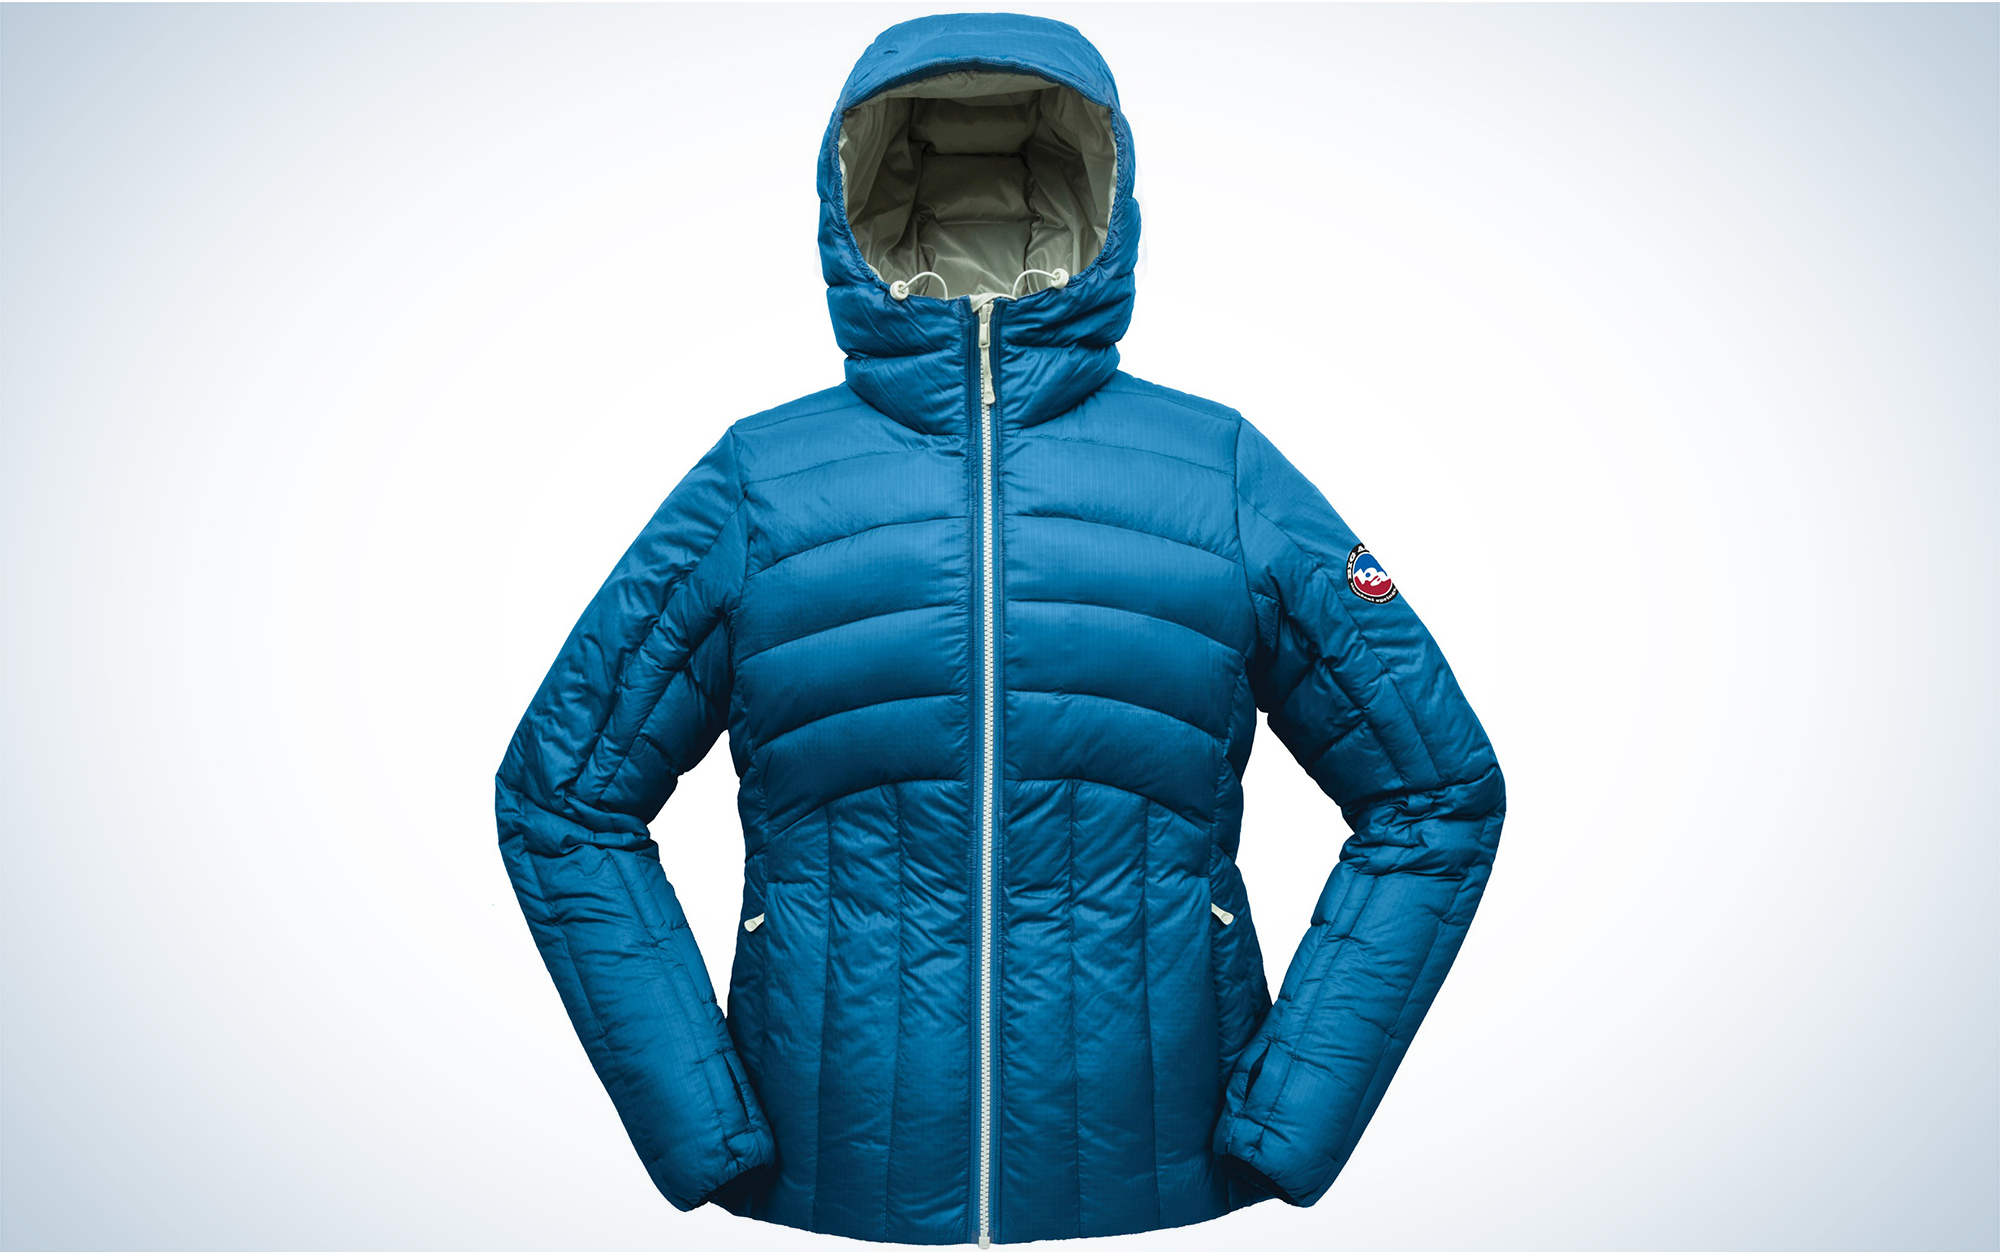 The Big Agnes Women’s Luna Jacket is the best hiking jacket for cold weather.